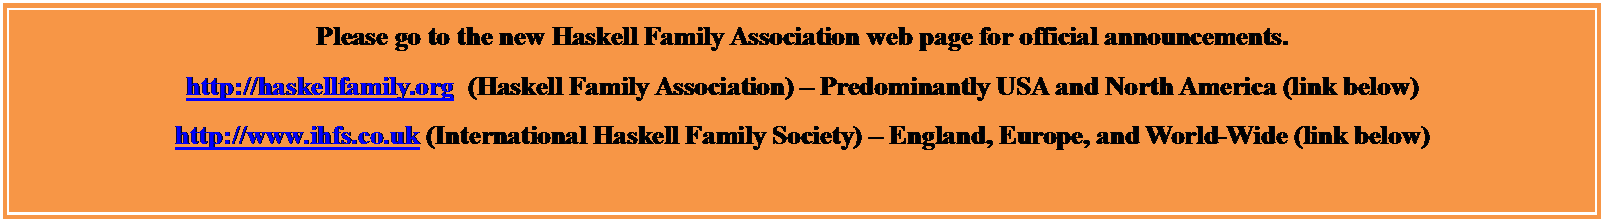 Text Box: Please go to the new Haskell Family Association web page for official announcements.  
http://haskellfamily.org  (Haskell Family Association)  Predominantly USA and North America (link below)
http://www.ihfs.co.uk (International Haskell Family Society)  England, Europe, and World-Wide (link below)


